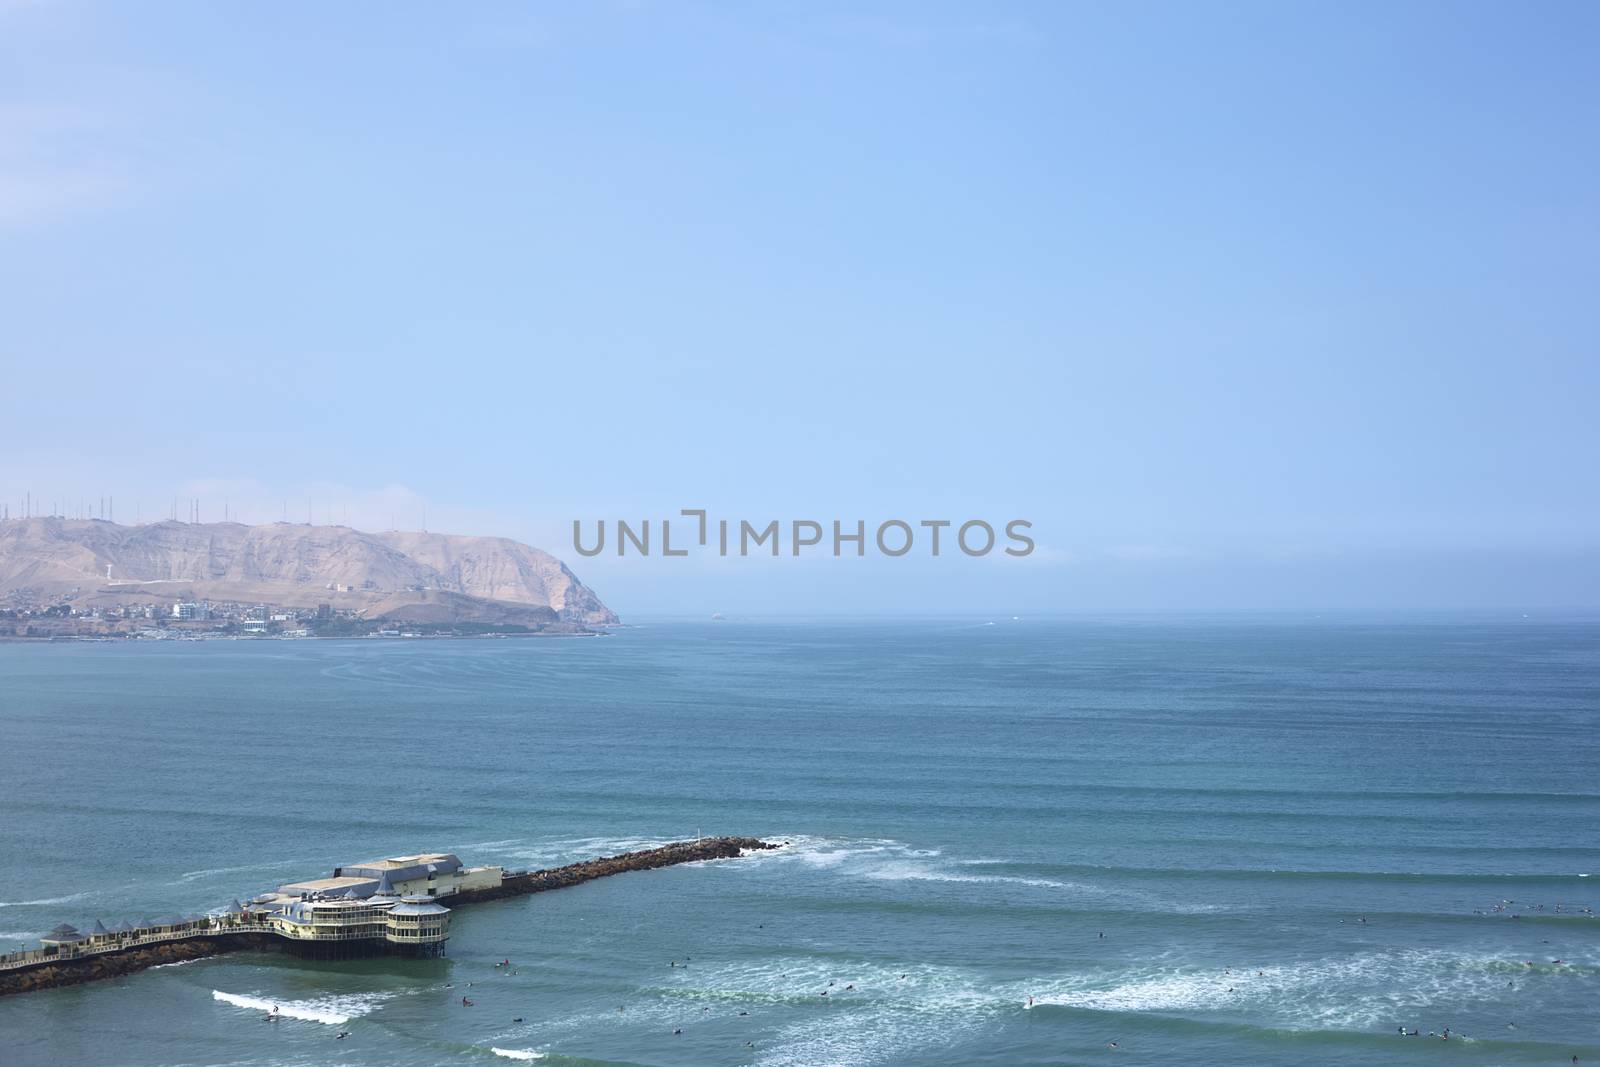 LIMA, PERU - MARCH 24, 2012: View of the restaurant La Rosa Nautica and the coastline of Chorrillos on March 24, 2012 in Lima, Peru. There are many surfers in the water on this sunny summer day.